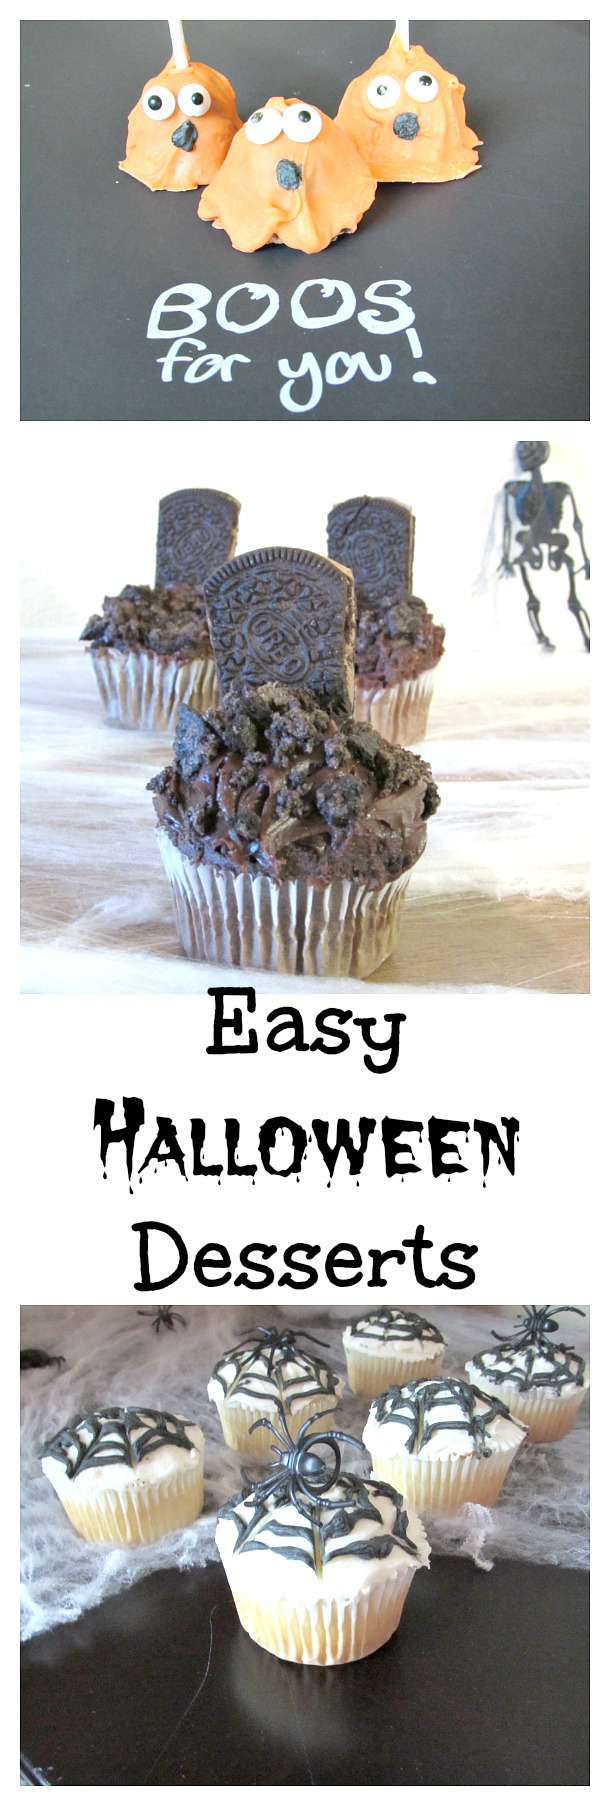 Easy Halloween Desserts! Graveyard cupcakes, ghost pops, spiderweb cupcakes and more